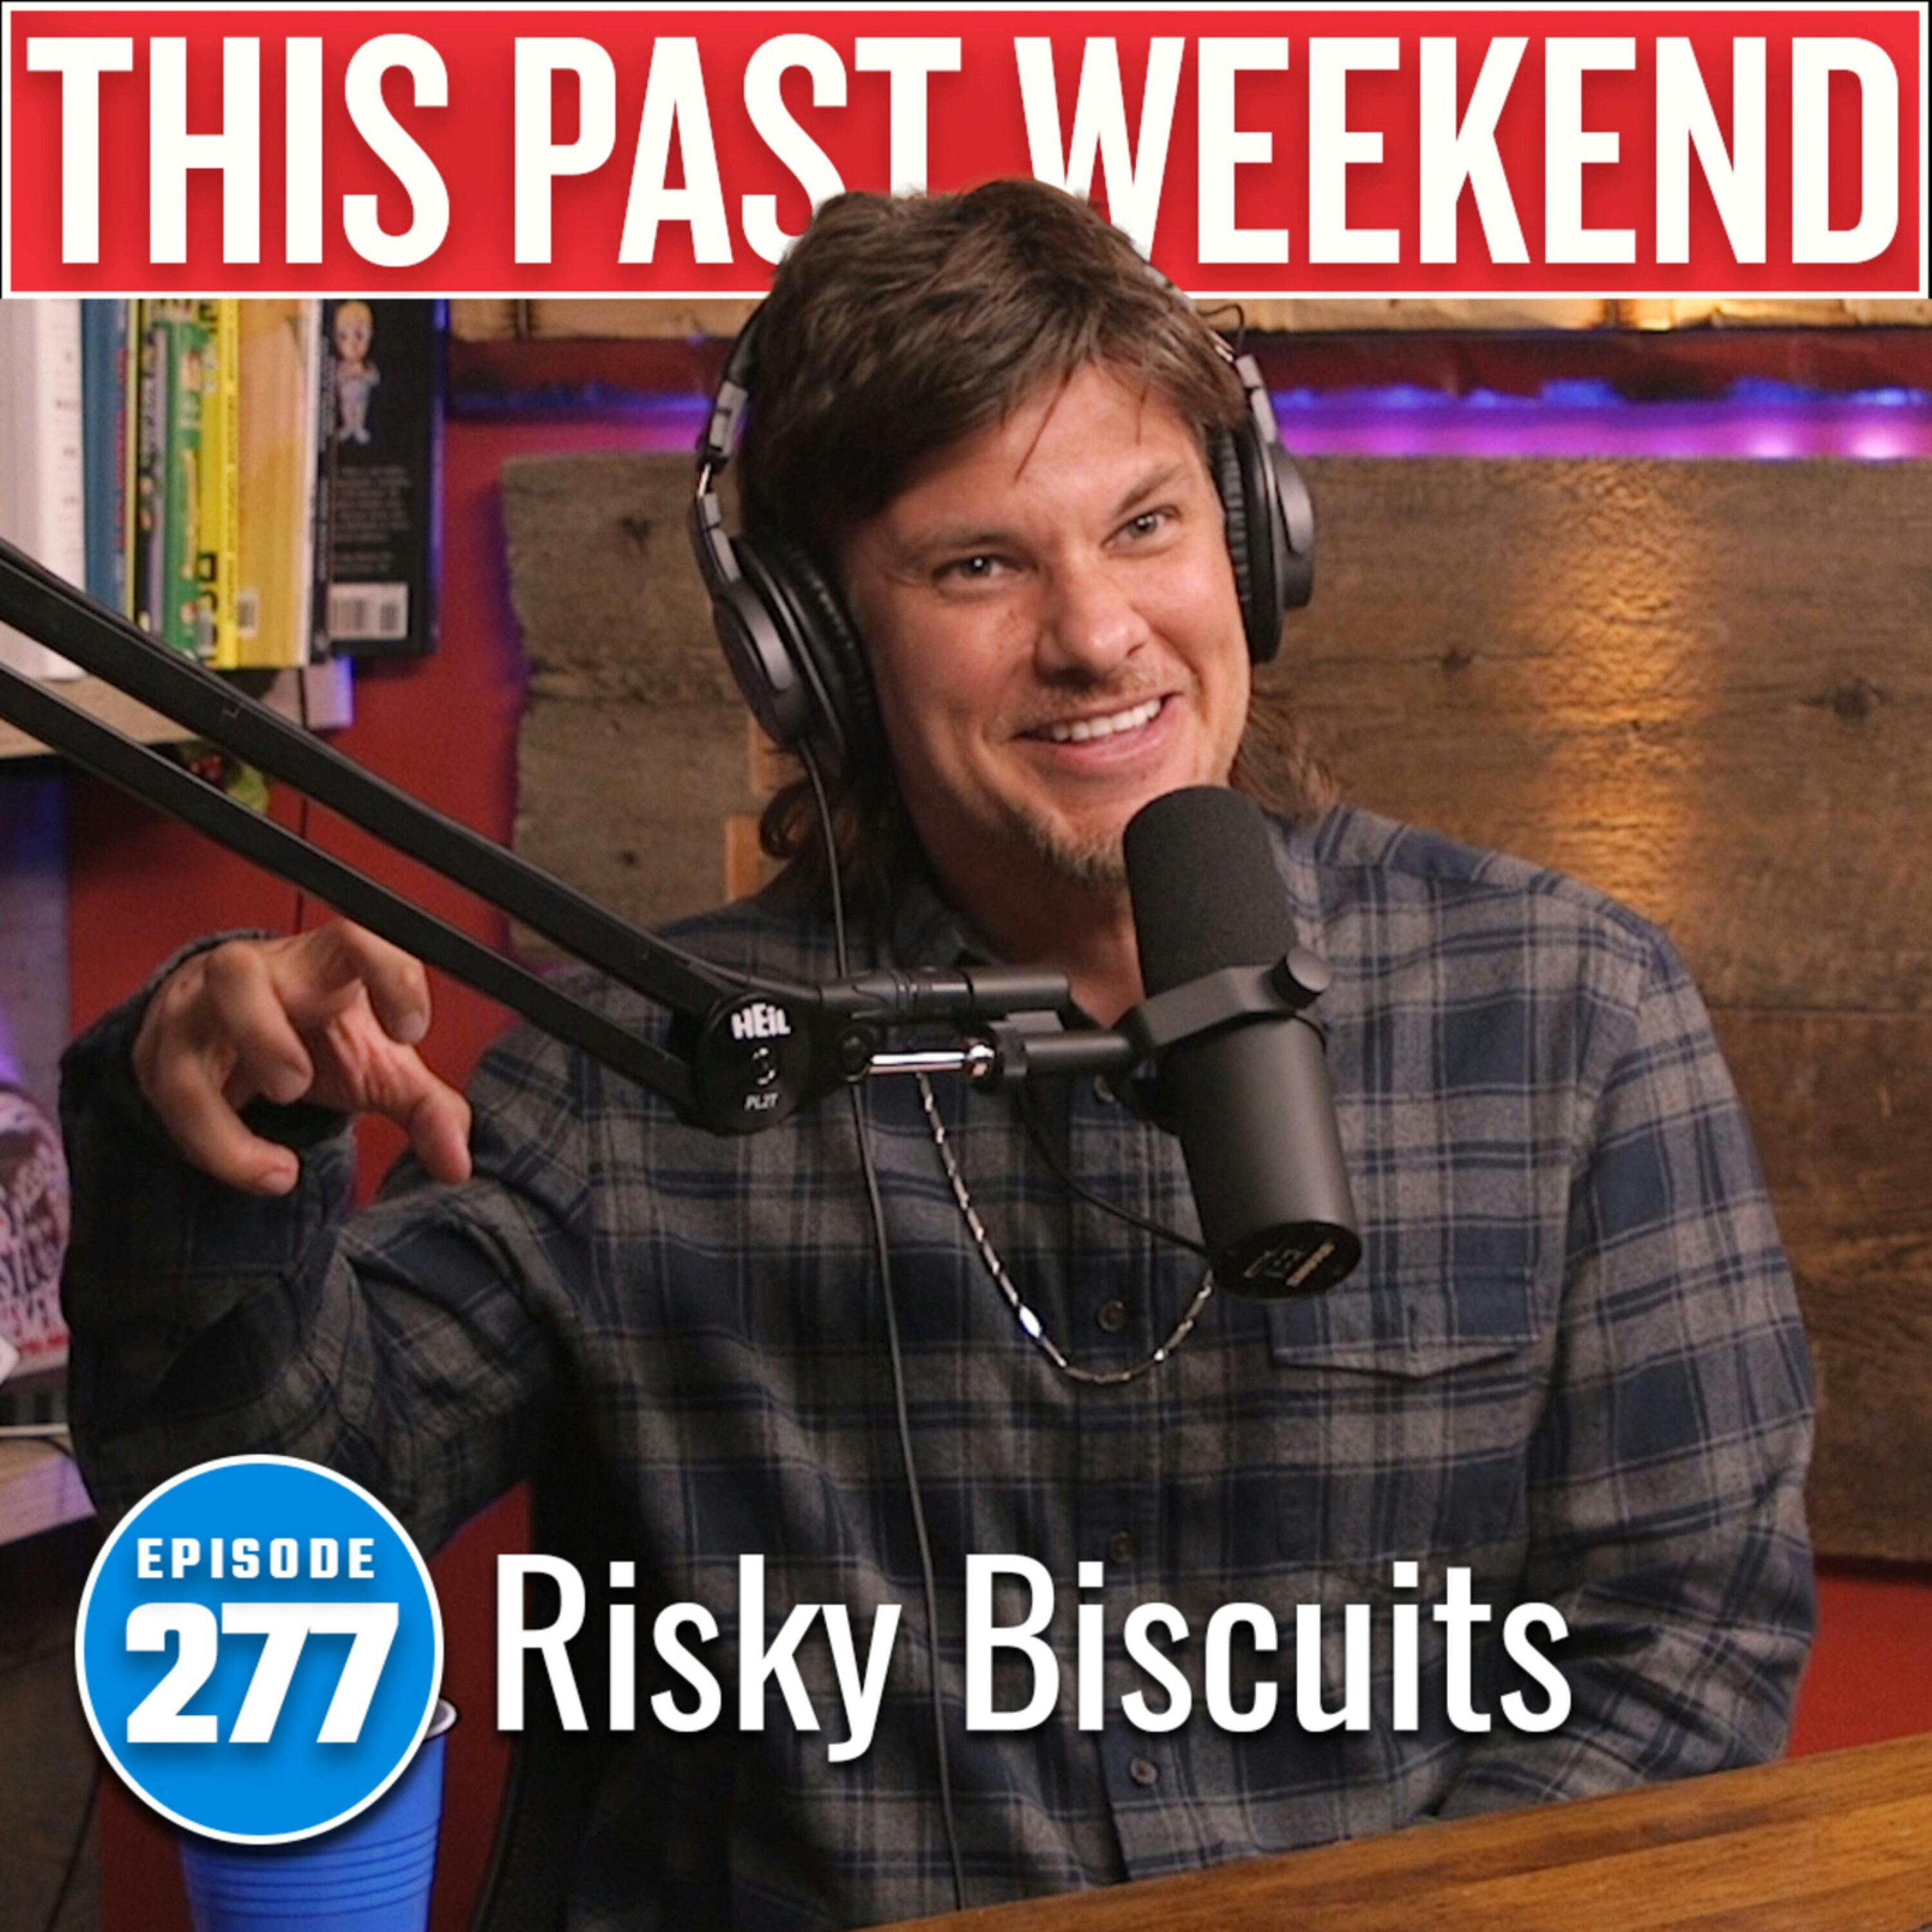 Risky Biscuits | This Past Weekend #277 by Theo Von